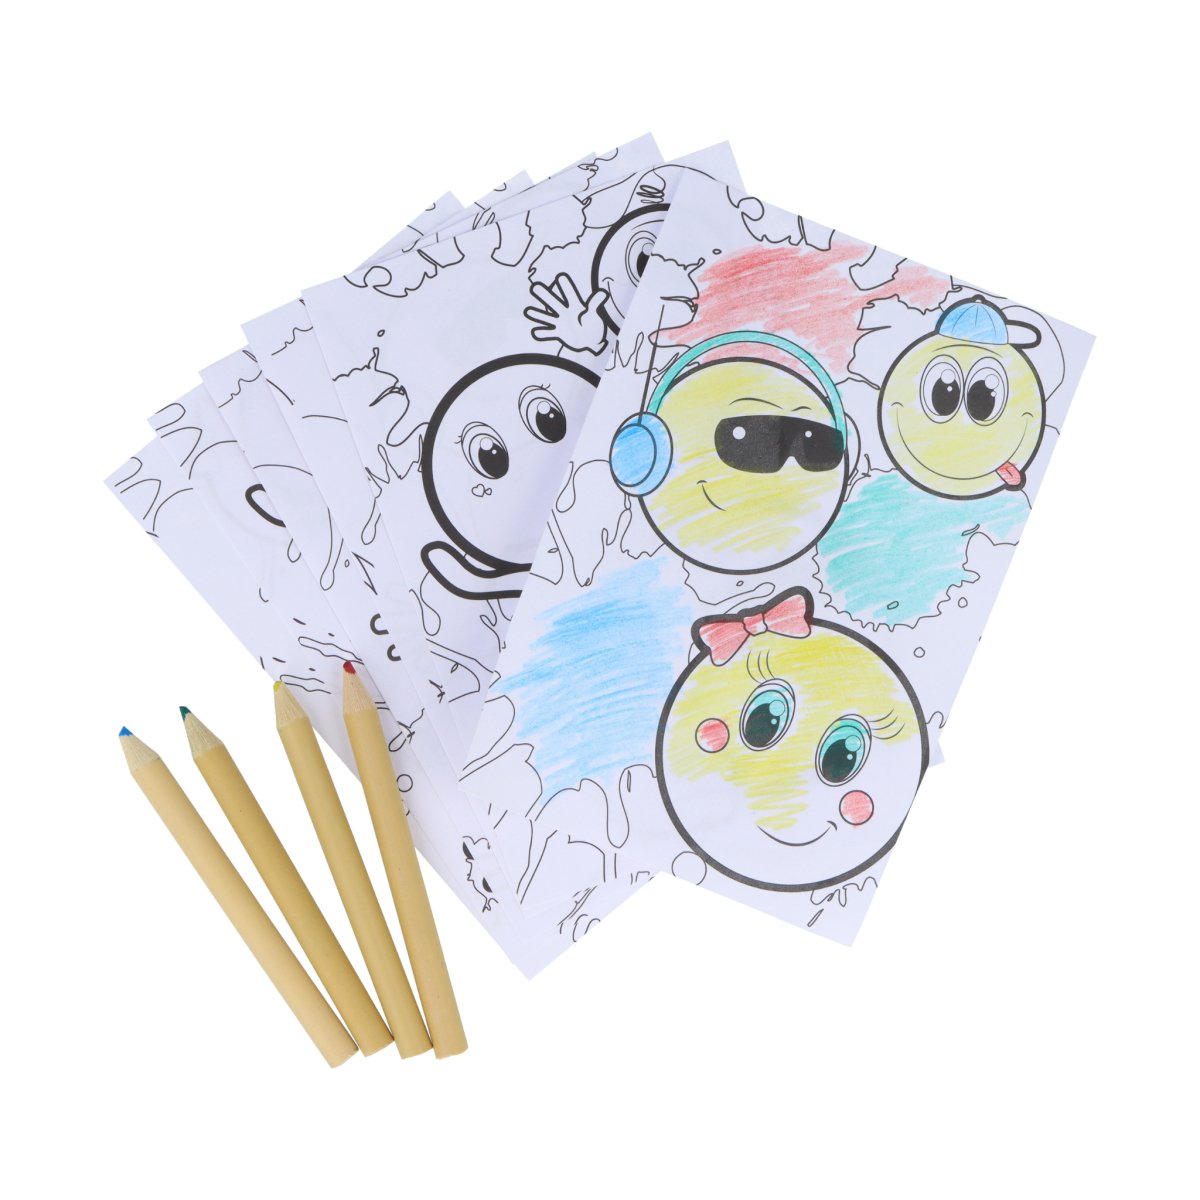 Eco Friendly Smiley Colouring Set - Kids Party Craft